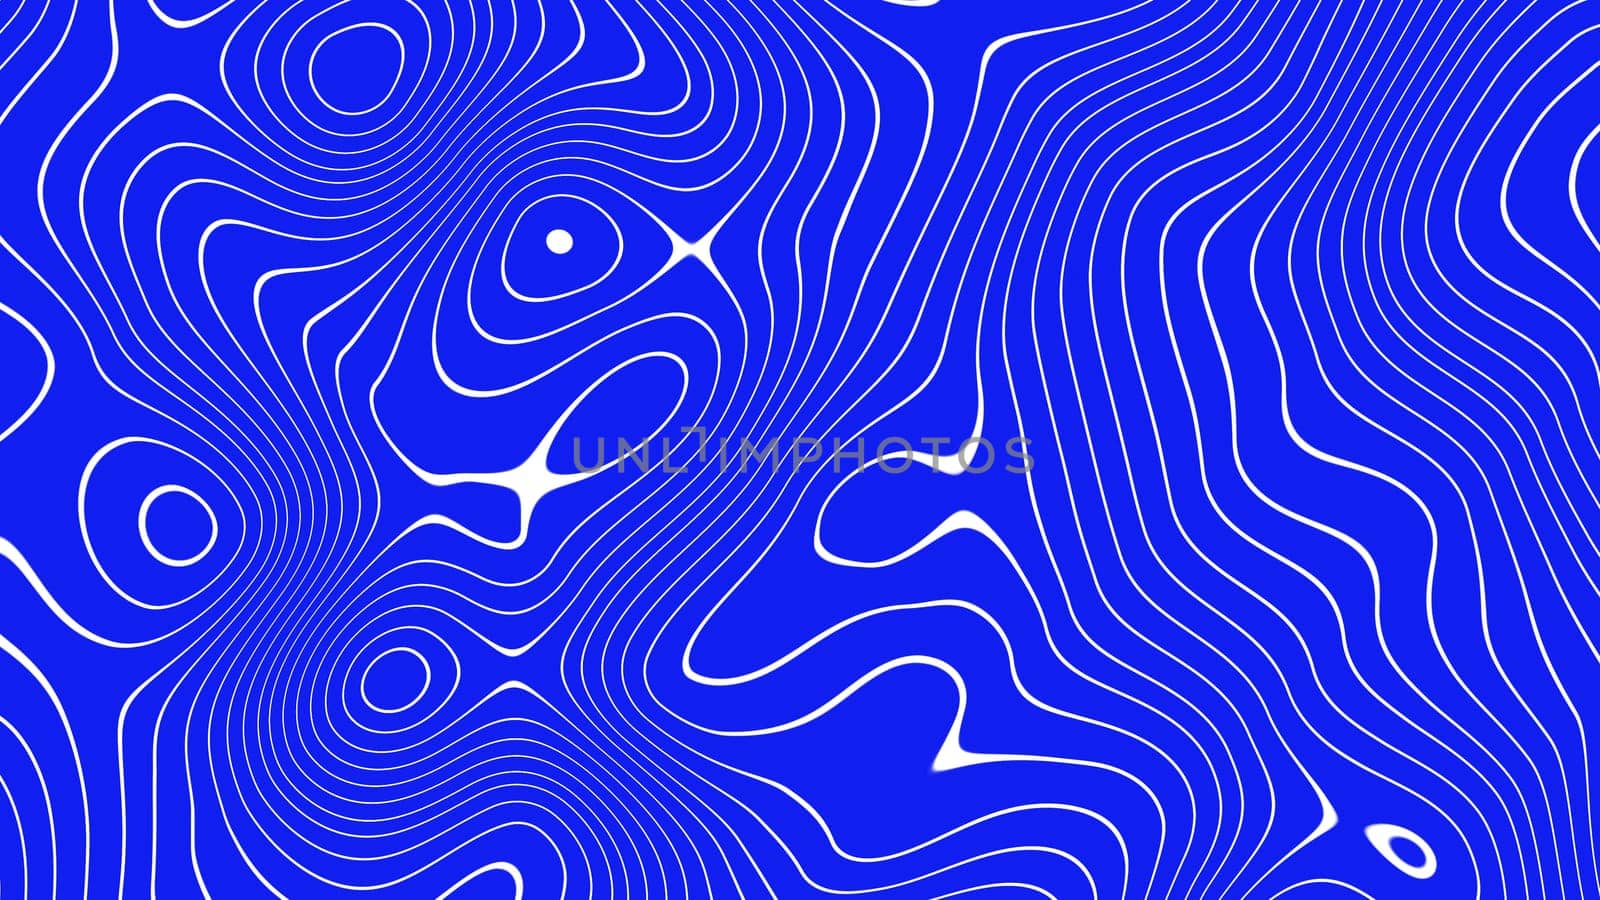 Curved seamless abstract background. Curved lines with white color. Blue background. High quality